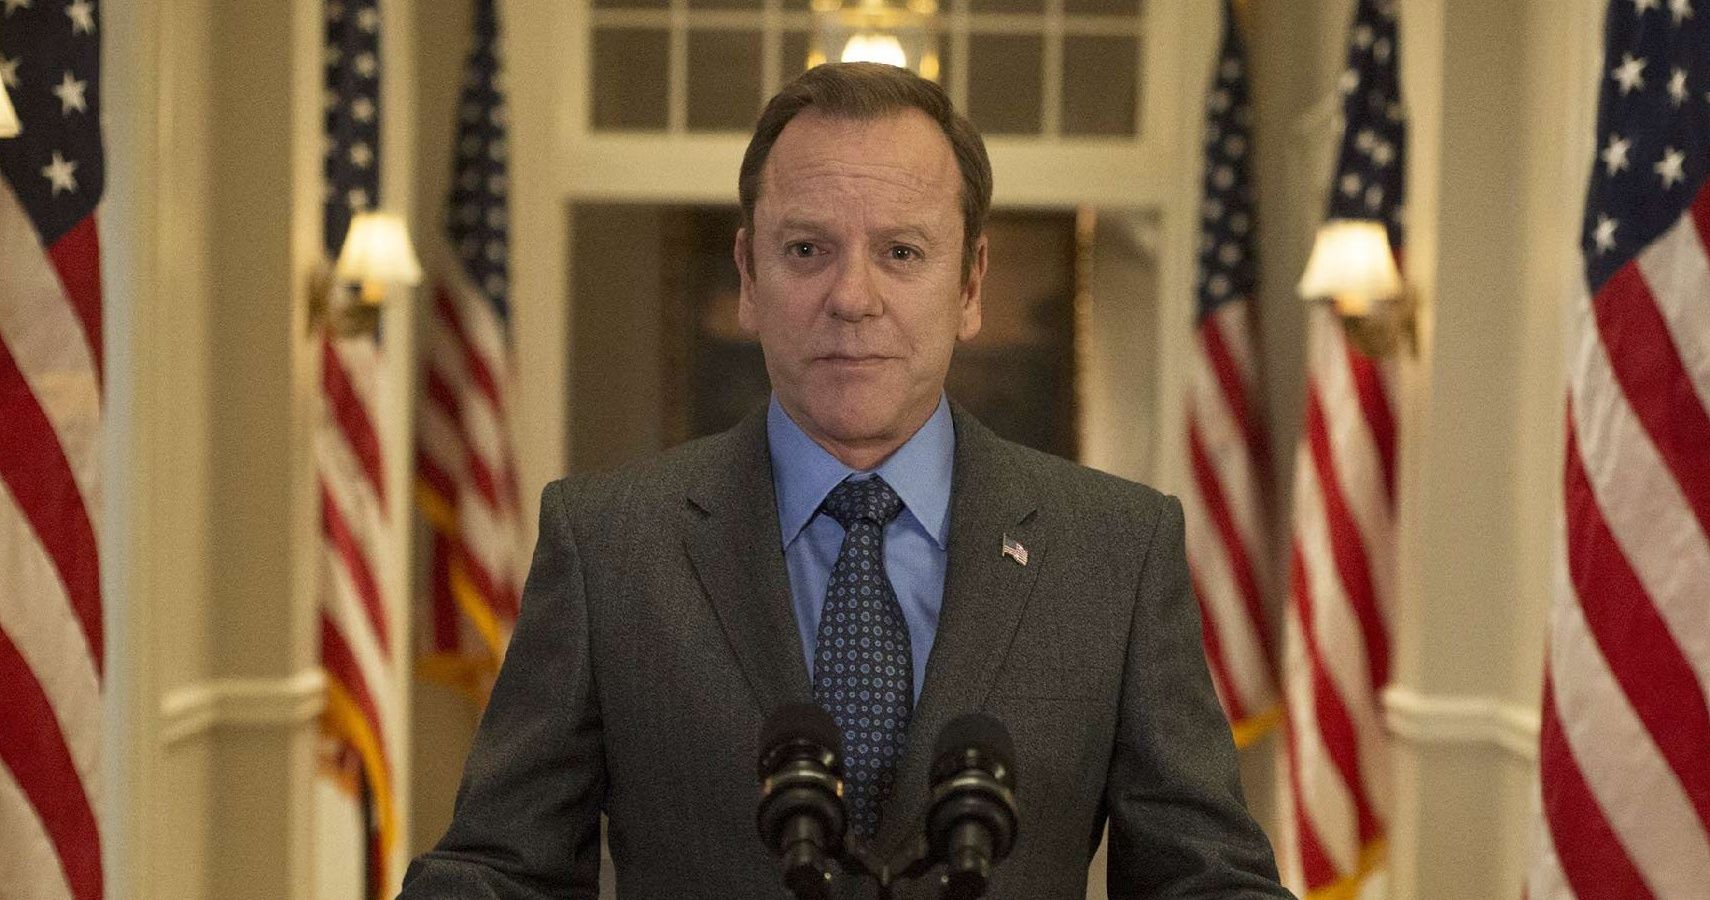 10 Best Things About The Pilot Of Designated Survivor